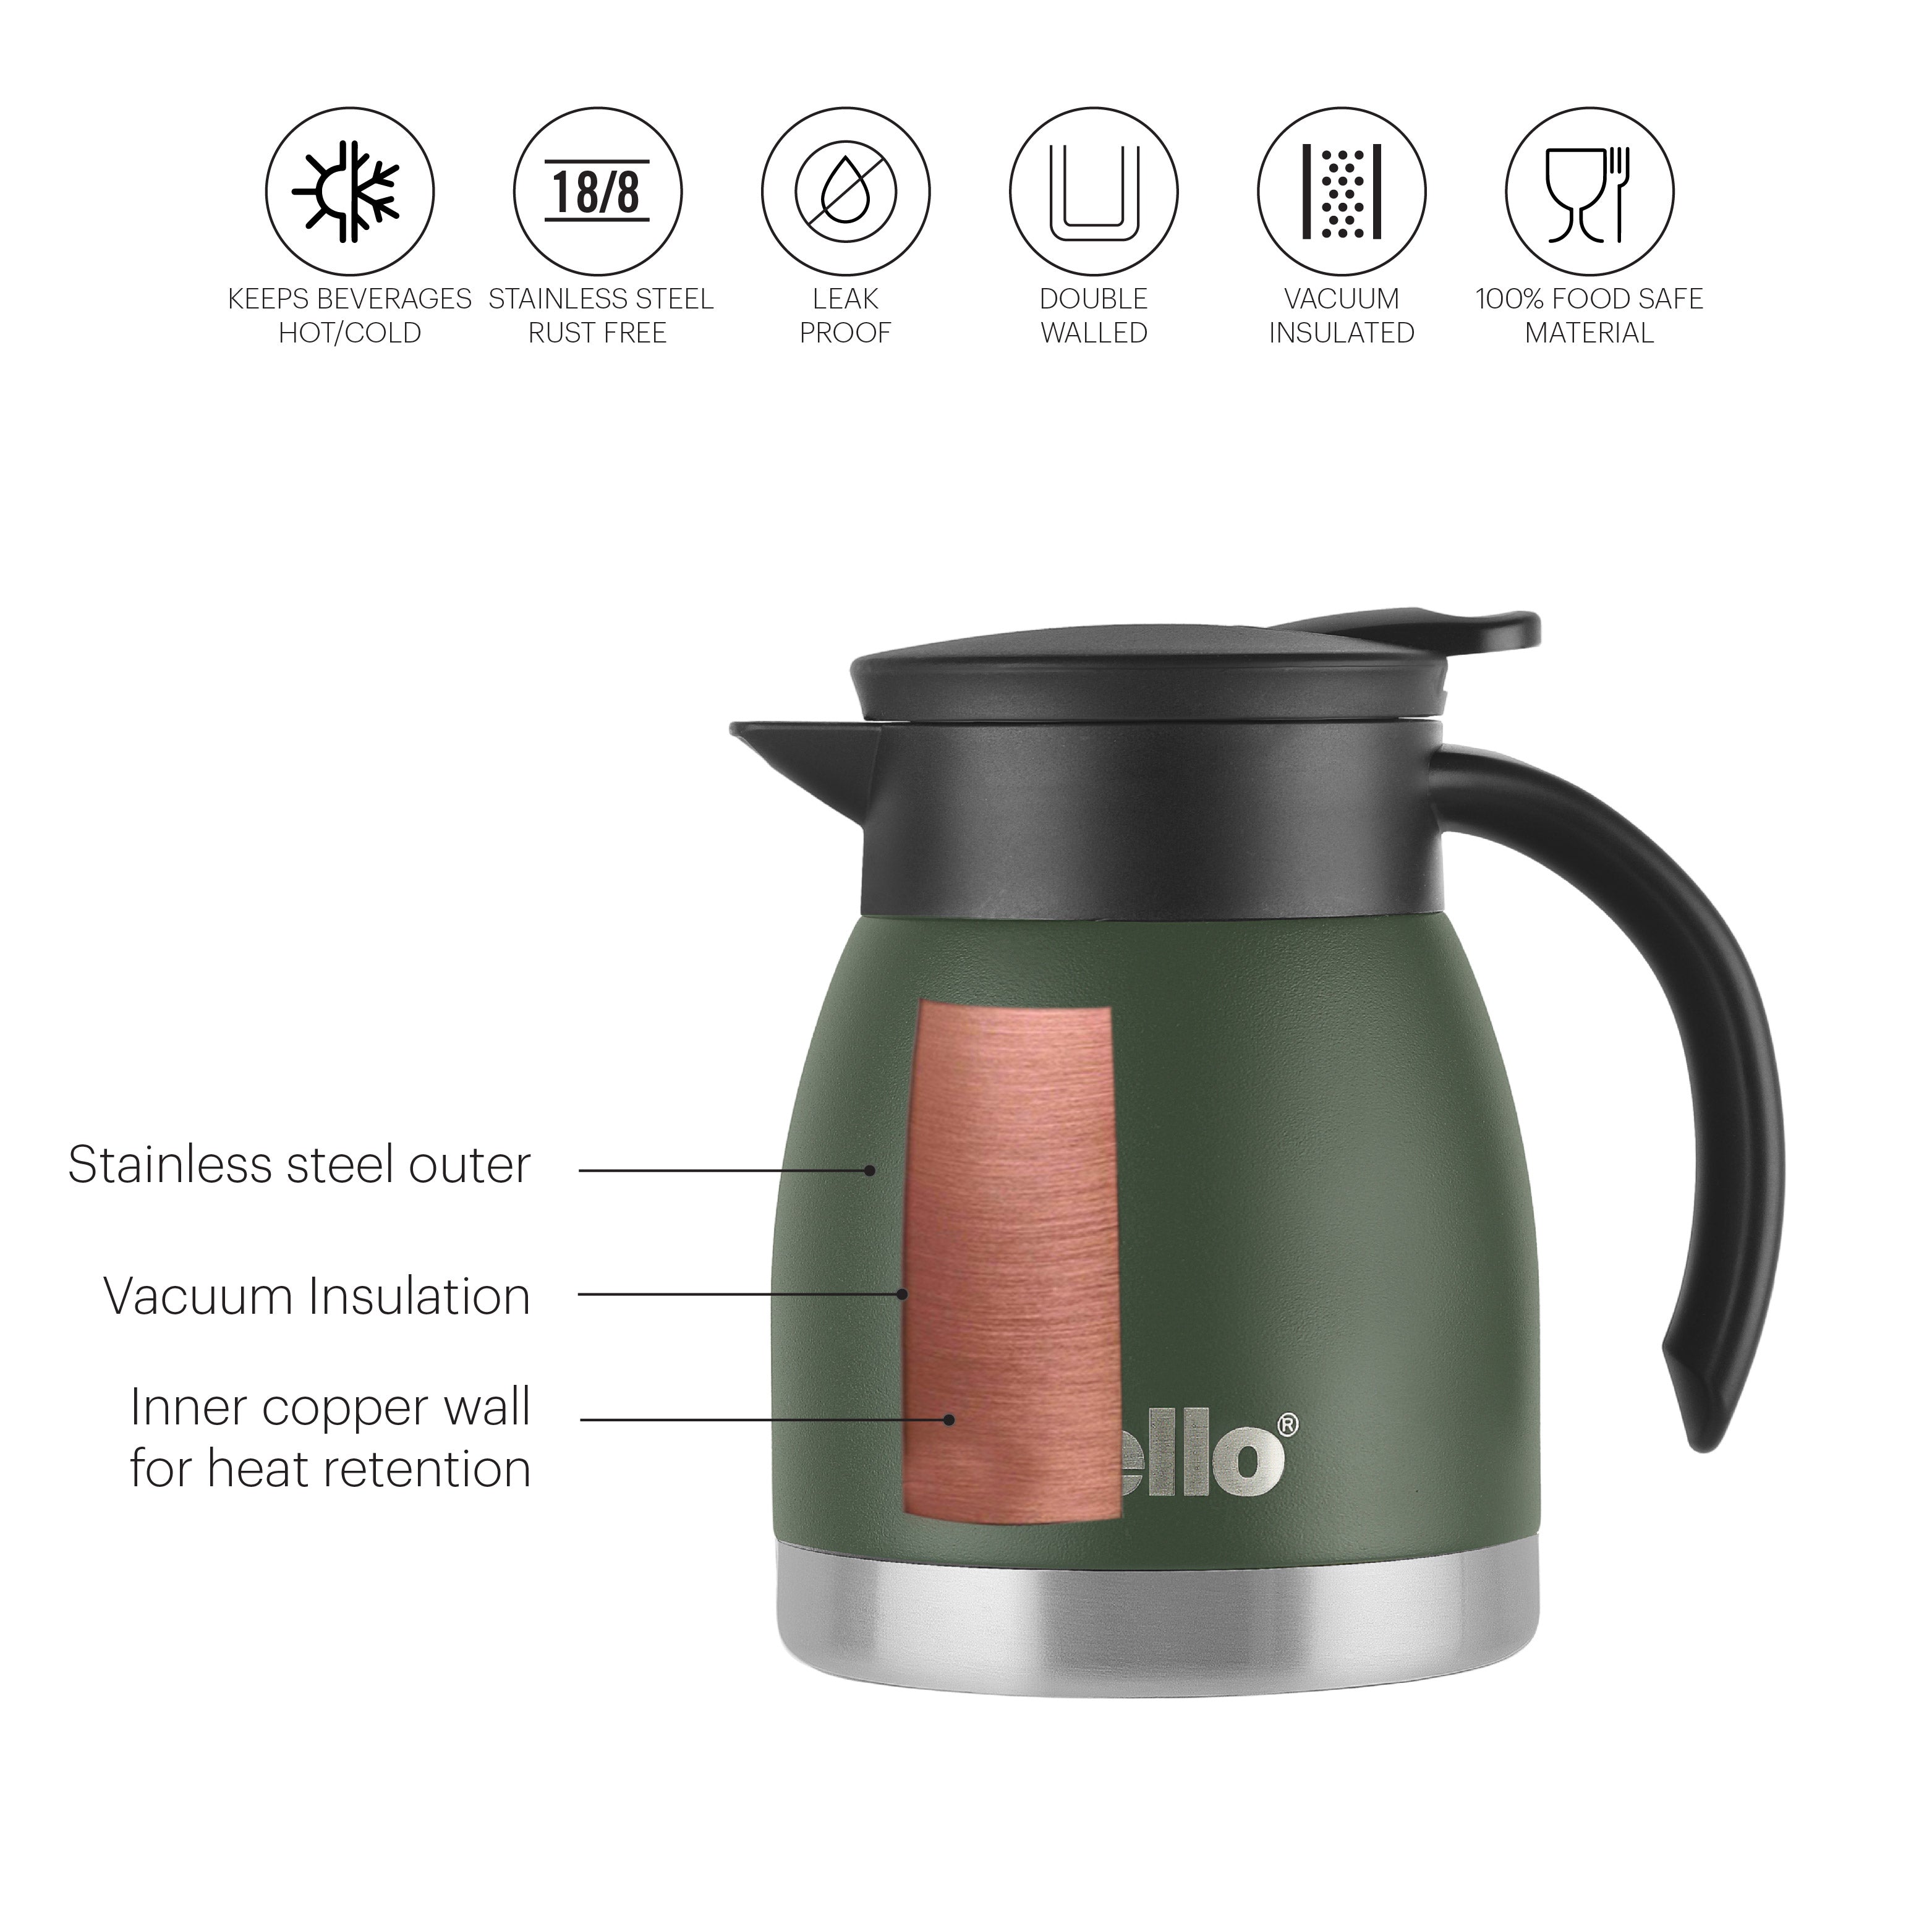 Duro Pot Double Walled Vacuum Insulated Teapot, 600ml Green / 600ml / 1 Piece